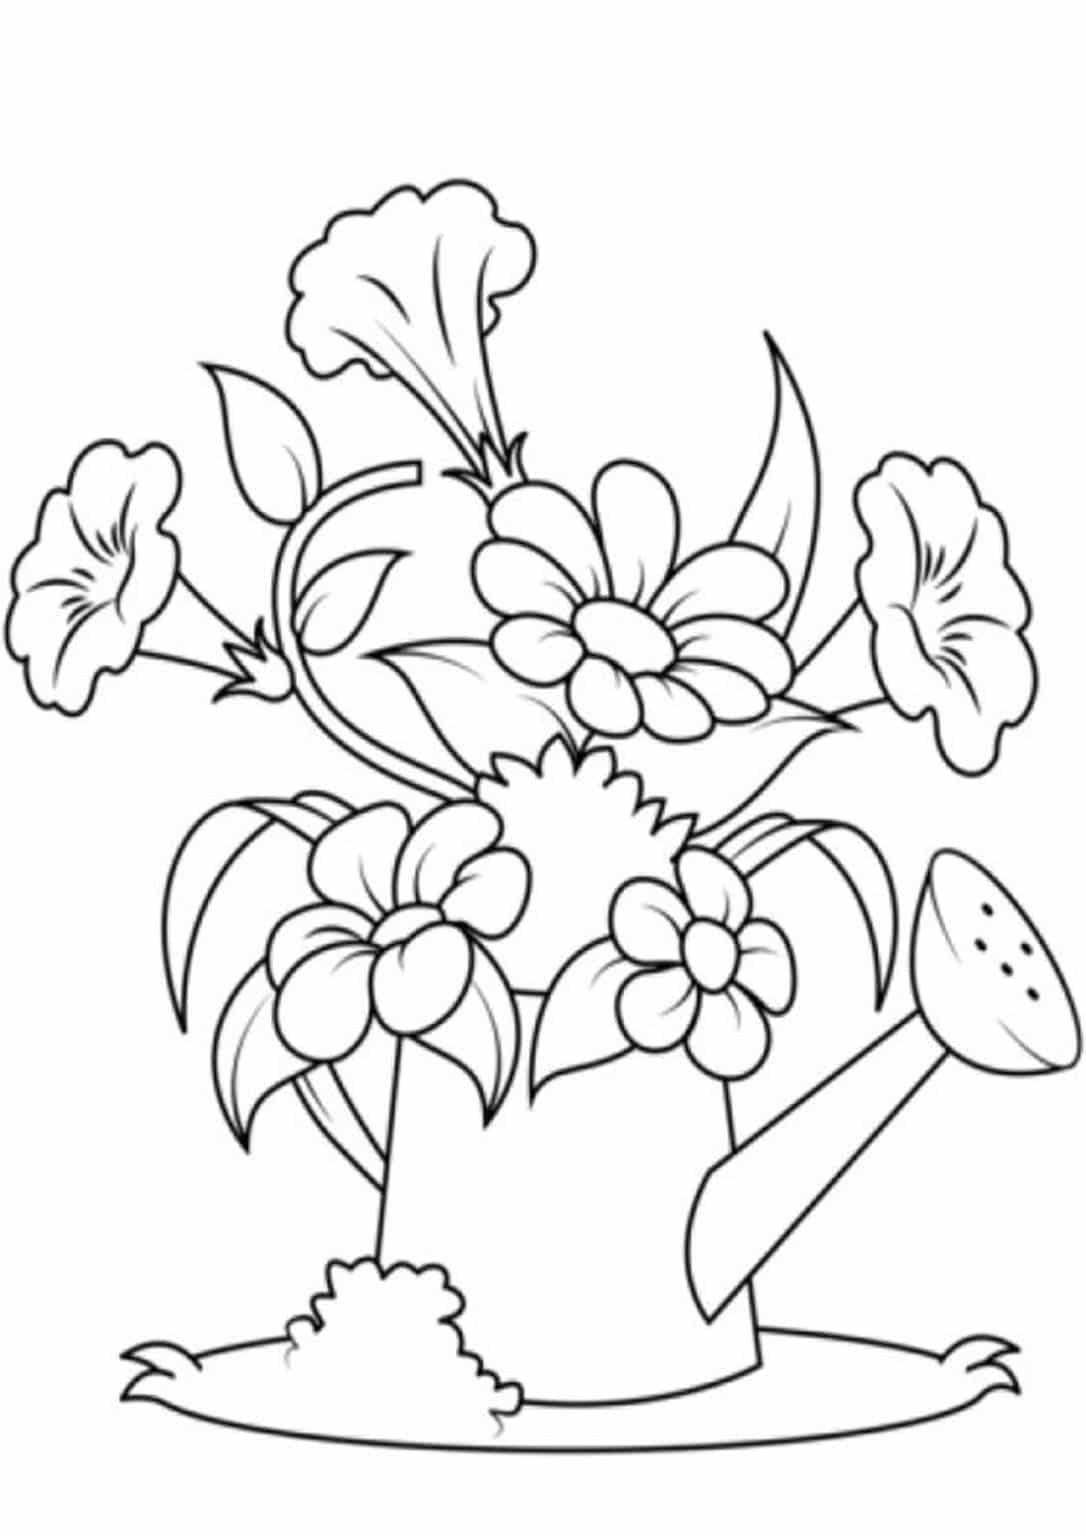 free-printable-flower-coloring-pages-for-kids-best-coloring-pages-for-36-printable-flower